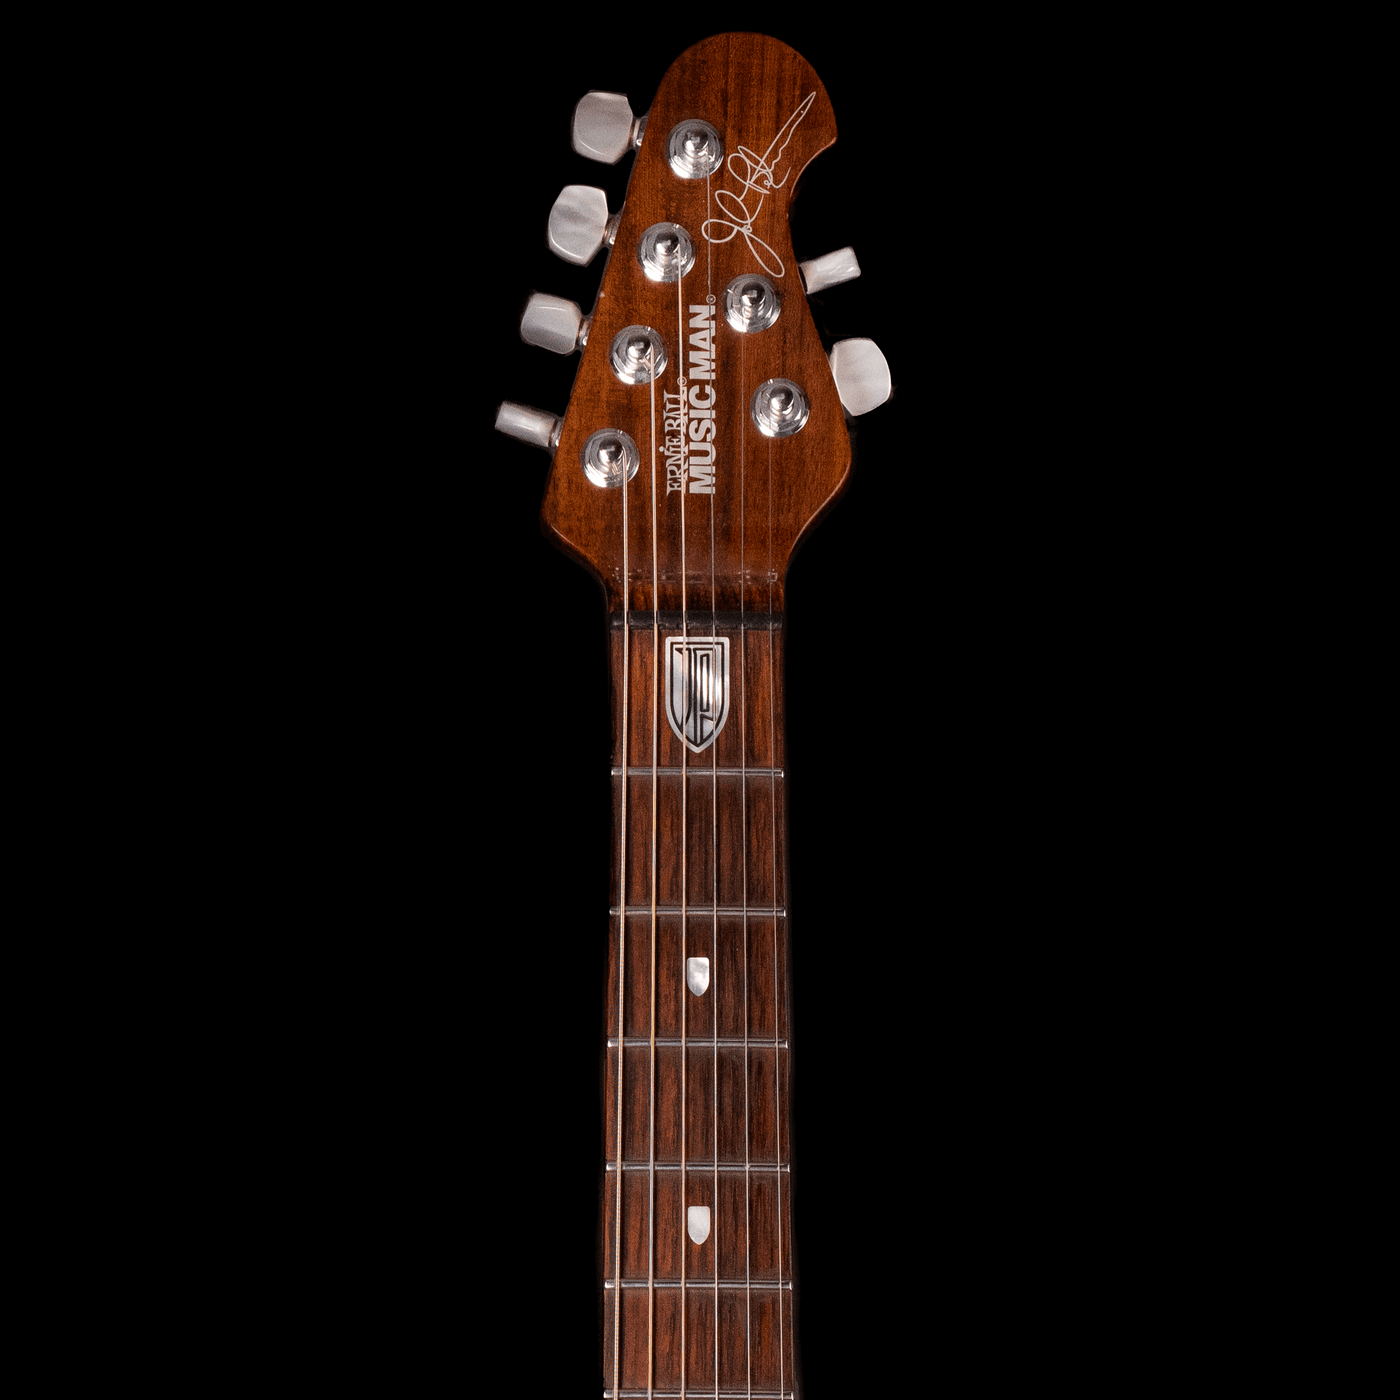 Musicman JP6 Ball Family Reserve Mystic Dream 2009 - $3999990 - Gearhub - Wildwoodians, we are downright giddy that the latest offerings from the Ball Family Reserve have arrived. For those who are unfamiliar, the Ball Family Reserve is a line of limited-production guitars that showcase exceptional tonewoods, drool-inducing finishes, and extra-elegant designs. Previously, these fine instruments were only available to members of the Ball family and Ernie Ball Music Man's roster of artists, but Sterling Ball